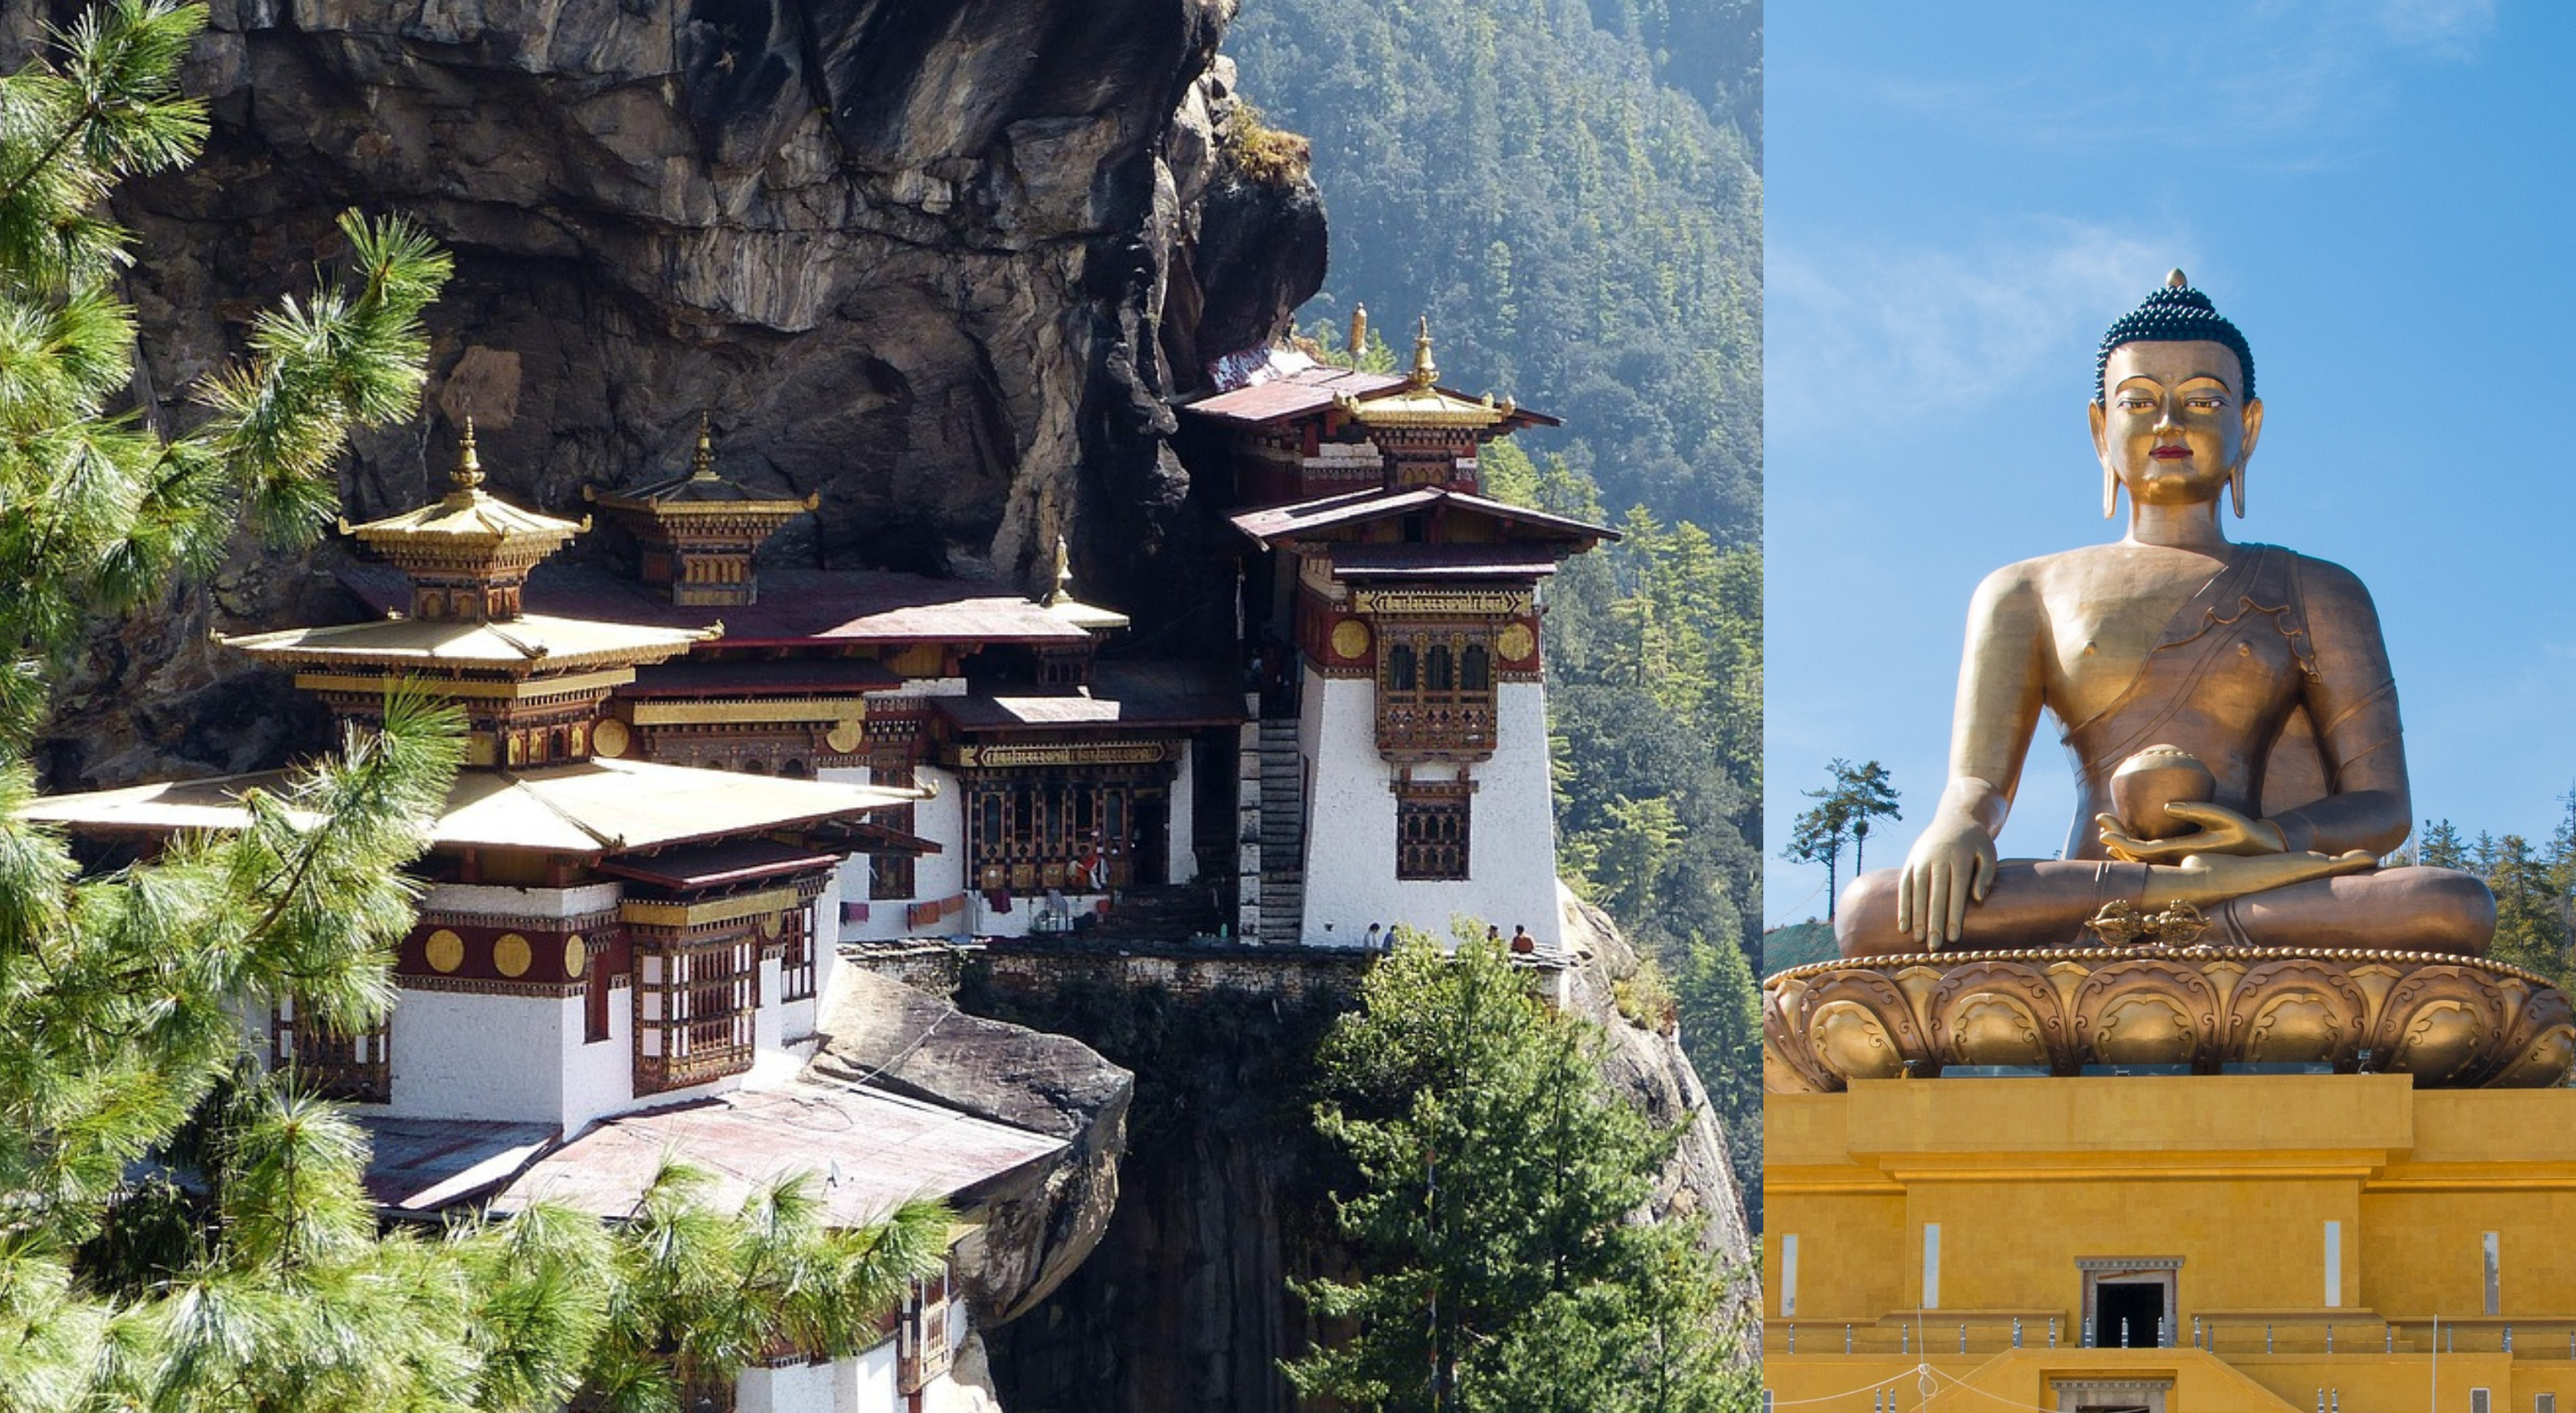 Statue of Buddha and temple on mountain edge in Bhutan - Top 7 Travel Destinations in the World That Offer Visa Free Entry for Indians